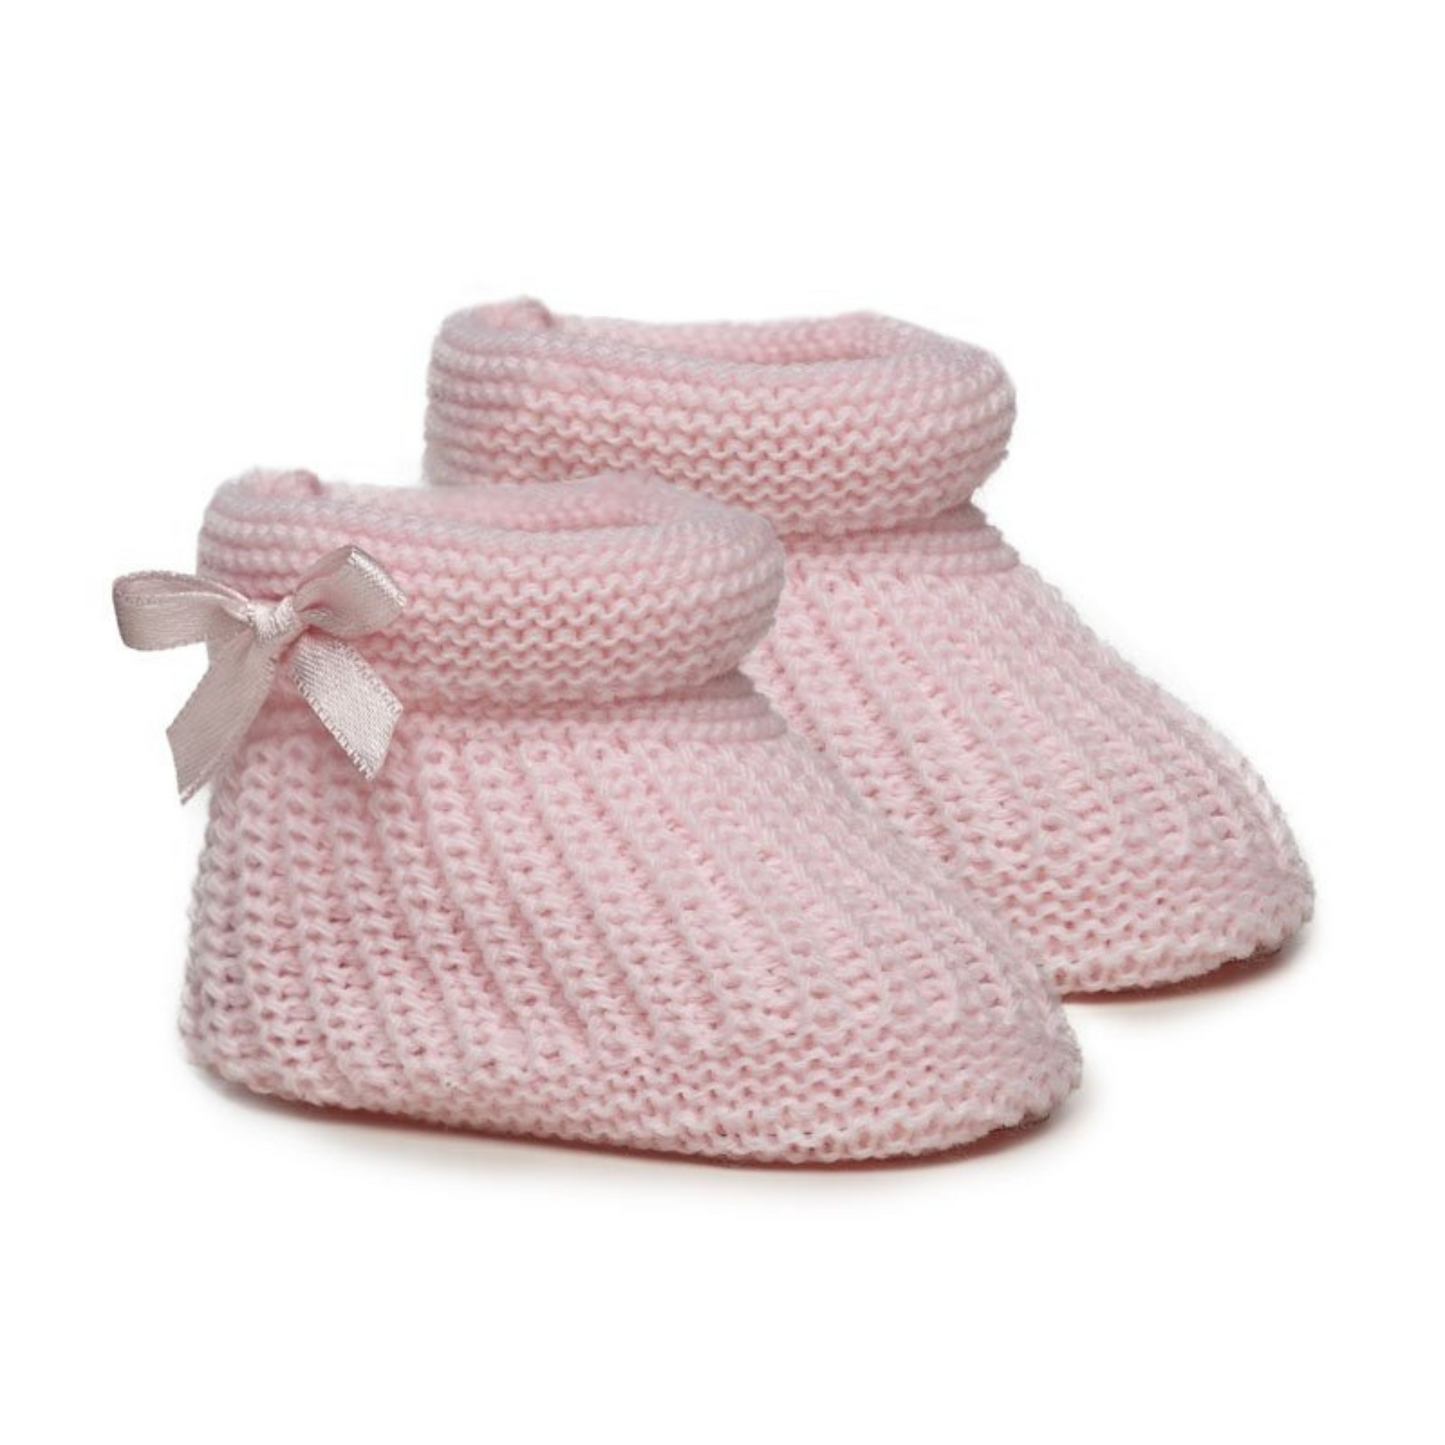 4 Piece Perforated Knitted Baby Gift Set